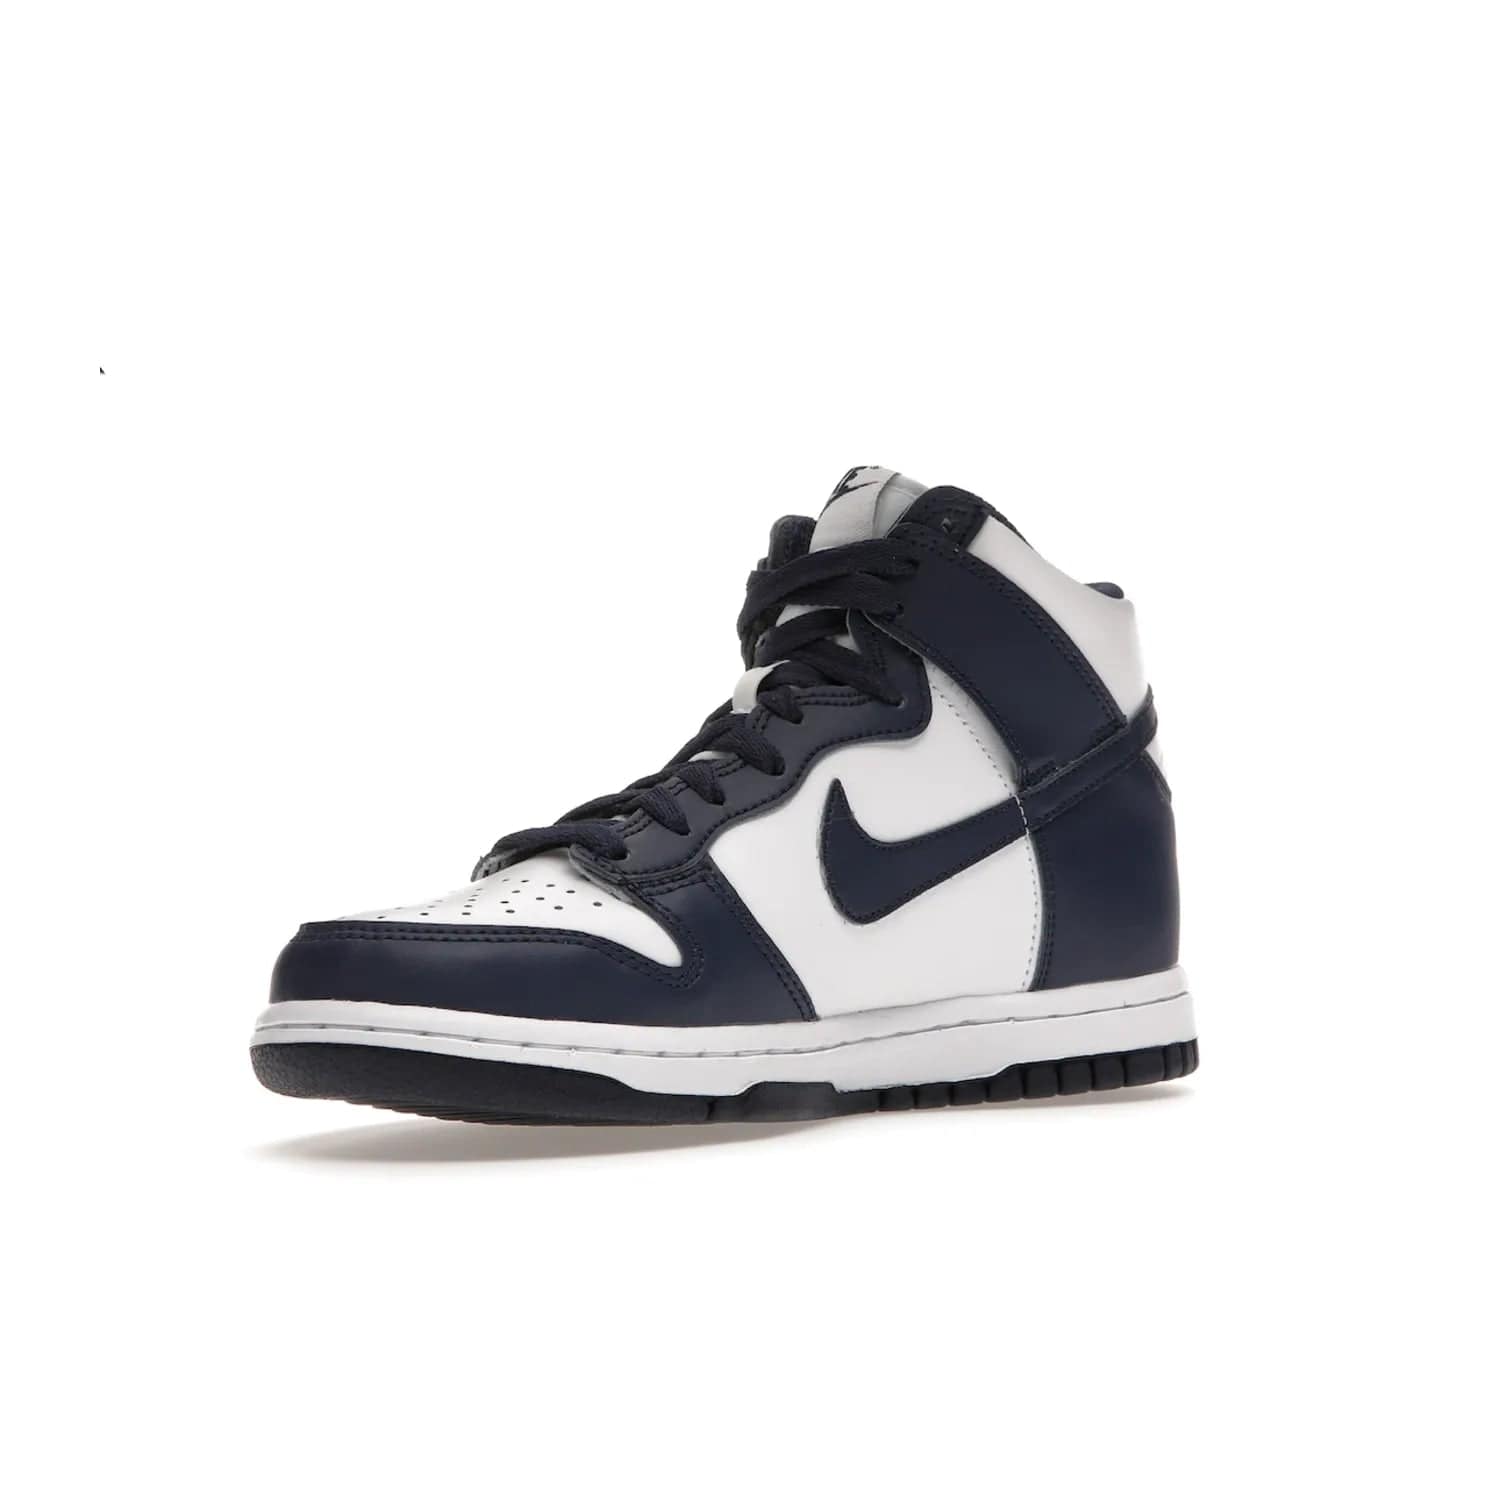 Nike Dunk High Championship Navy (GS) - Image 15 - Only at www.BallersClubKickz.com - Nike Dunk High Championship Navy GS: classic leather, suede, synthetic upper, chunky midsole, rubber herringbone sole. White base overlaid with Midnight Navy for a stylish finish. Padded high-cut collar and signature Nike swoosh design. Step out in these shoes and make a statement. Comfort and style at its finest.